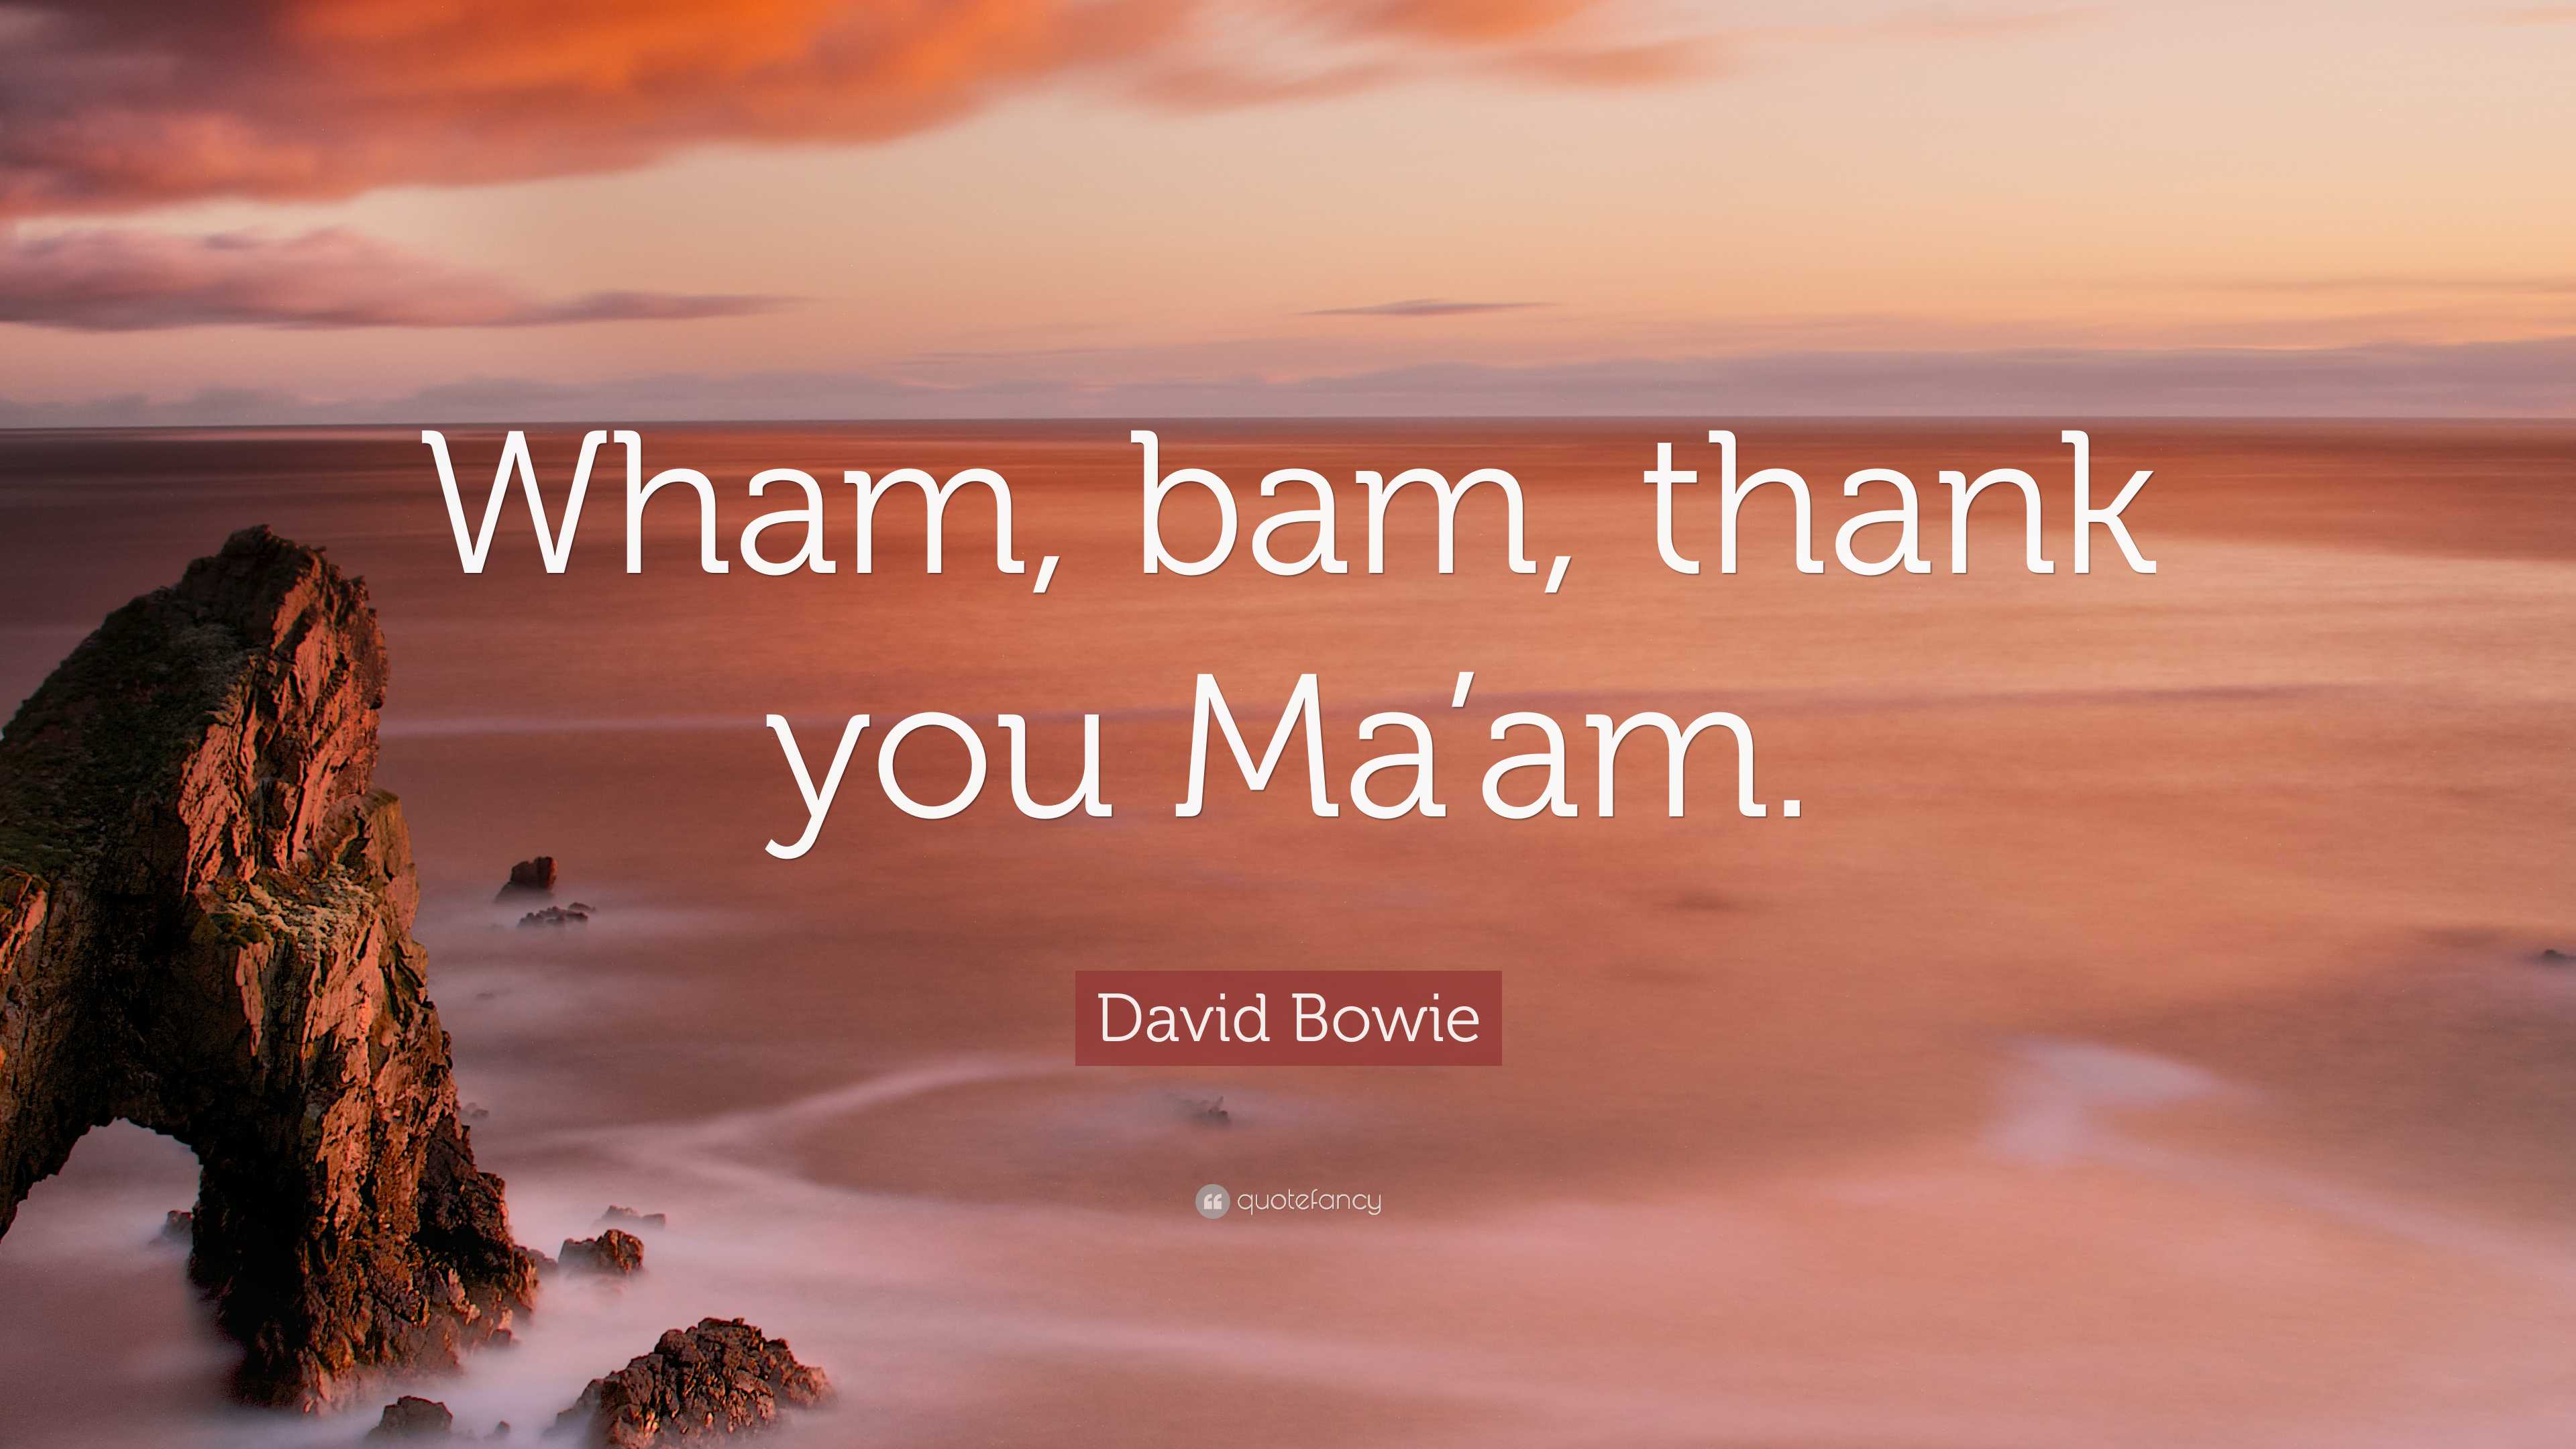 David Bowie Quote “wham Bam Thank You Maam” 3194